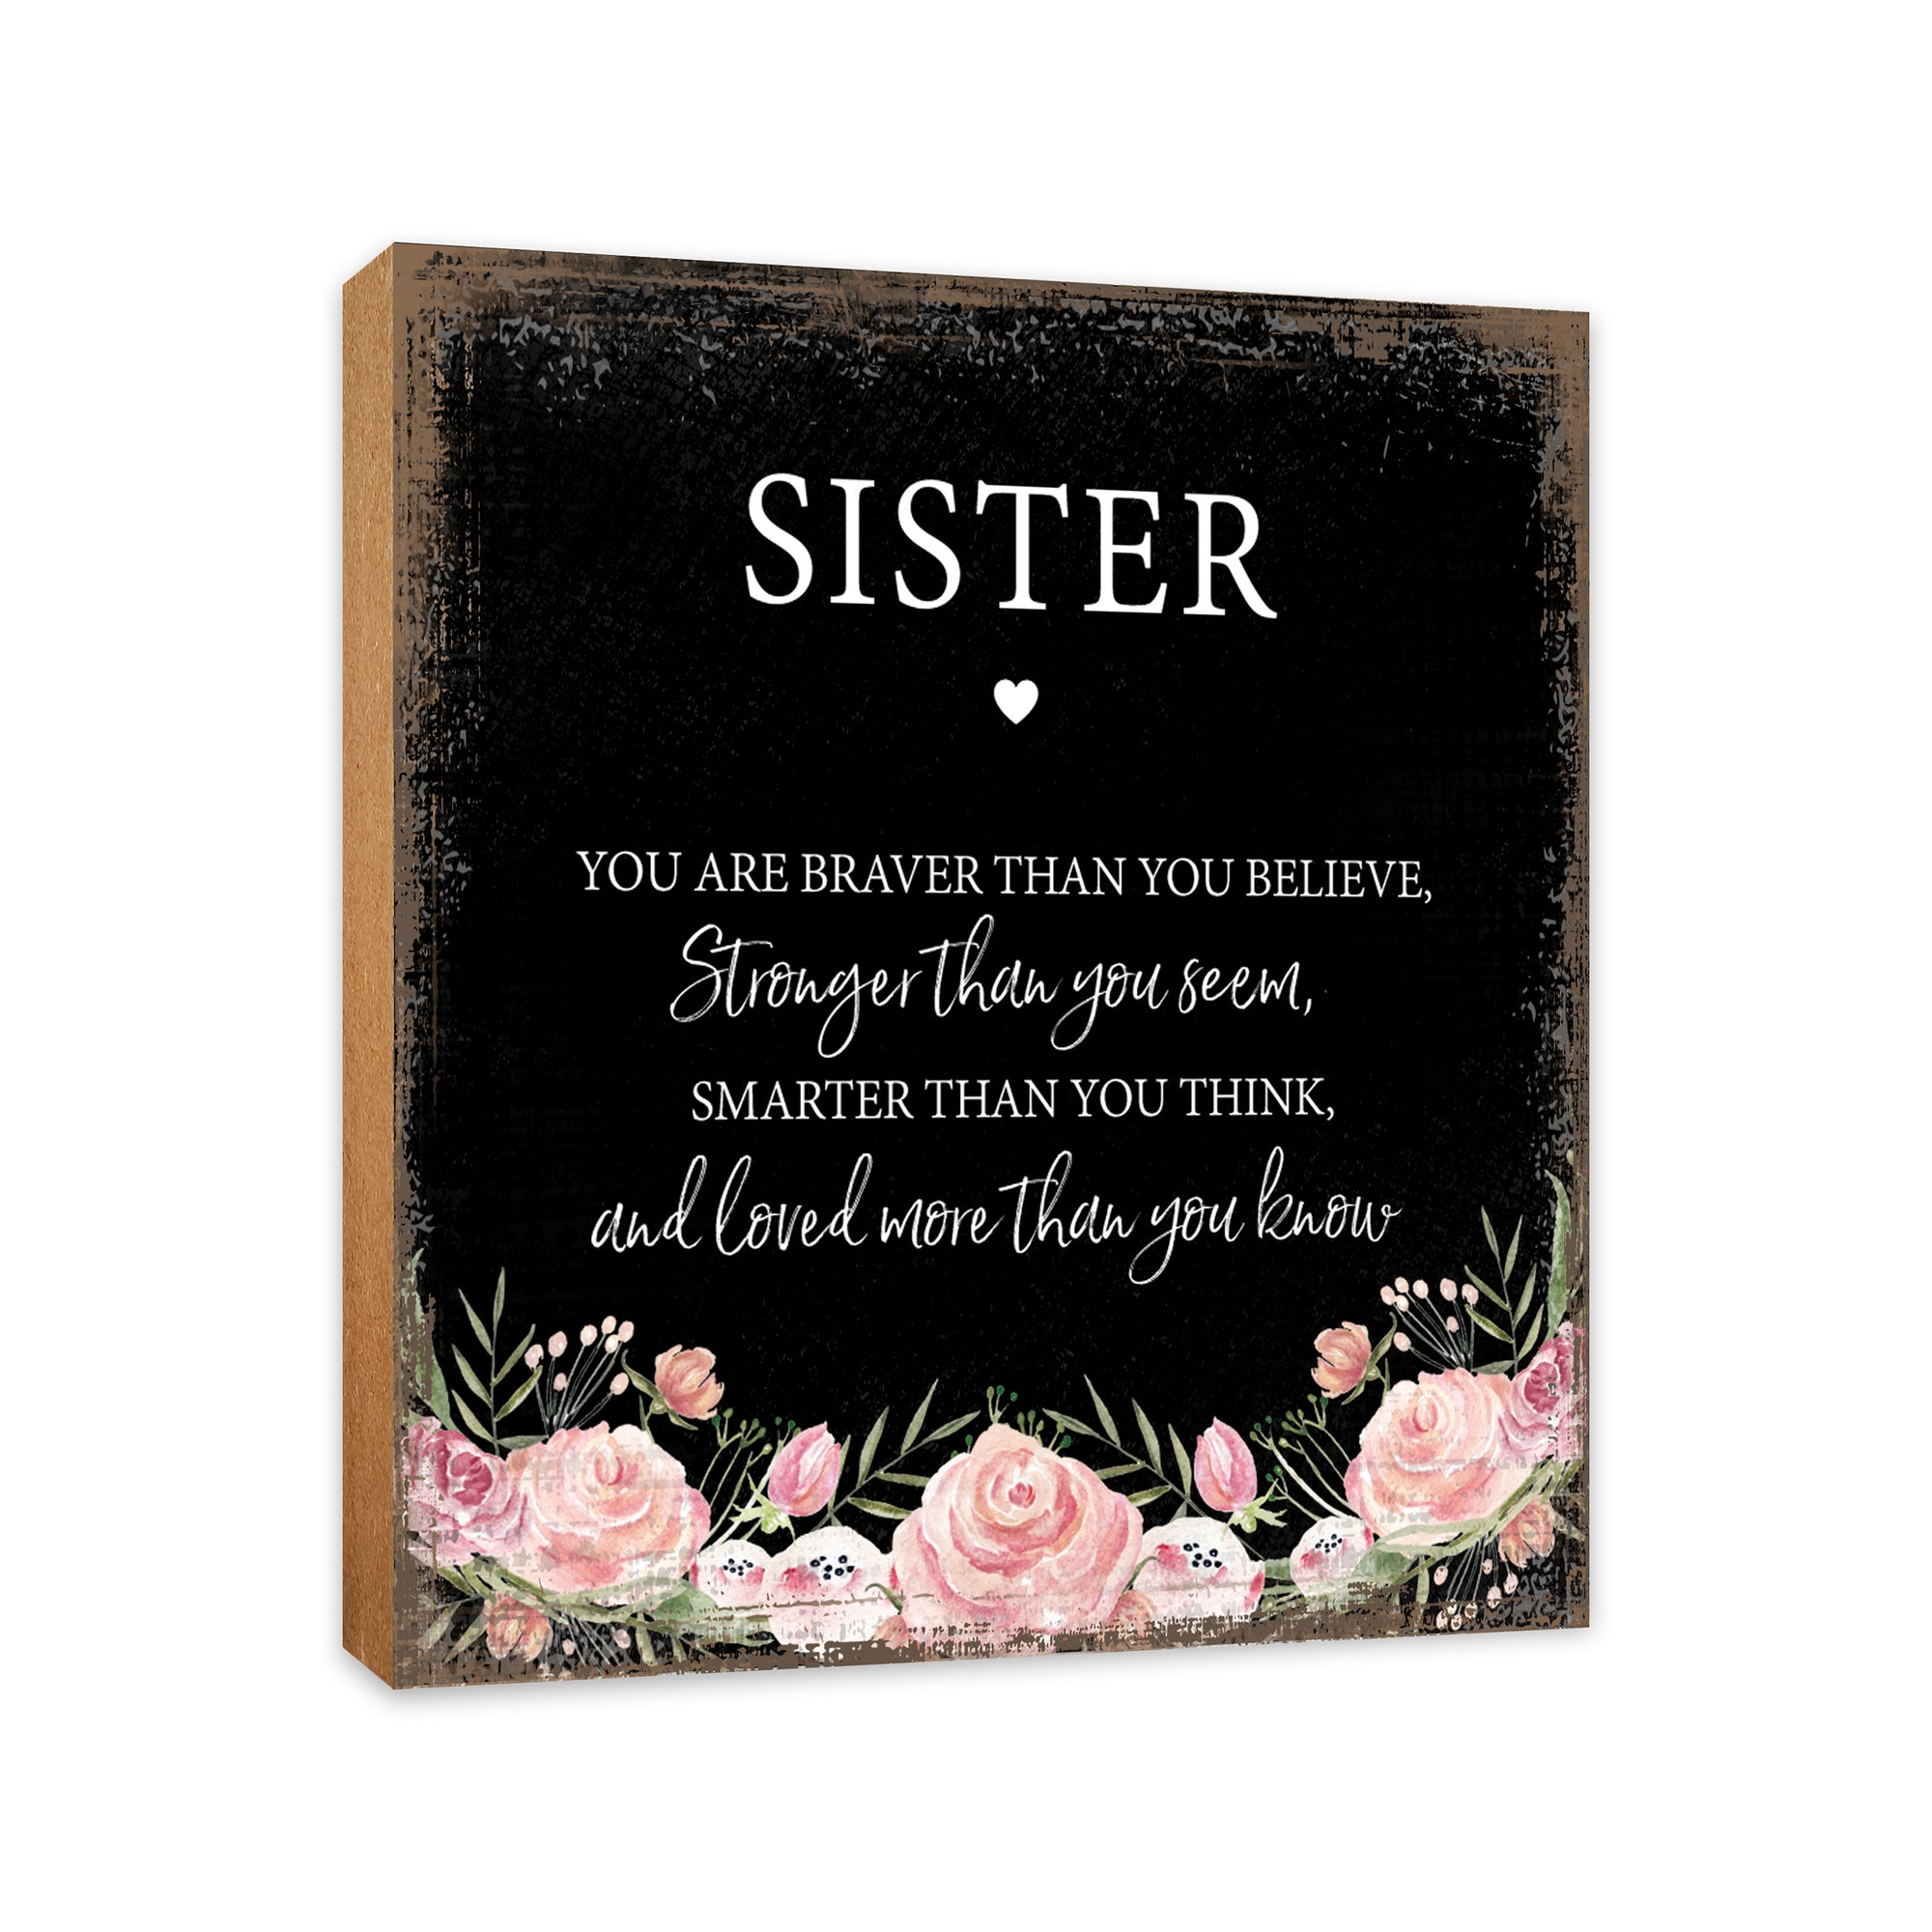 Sister, You Are Braver Floral 6x6 Inches Wood Family Art Sign Tabletop and Shelving For Home Décor